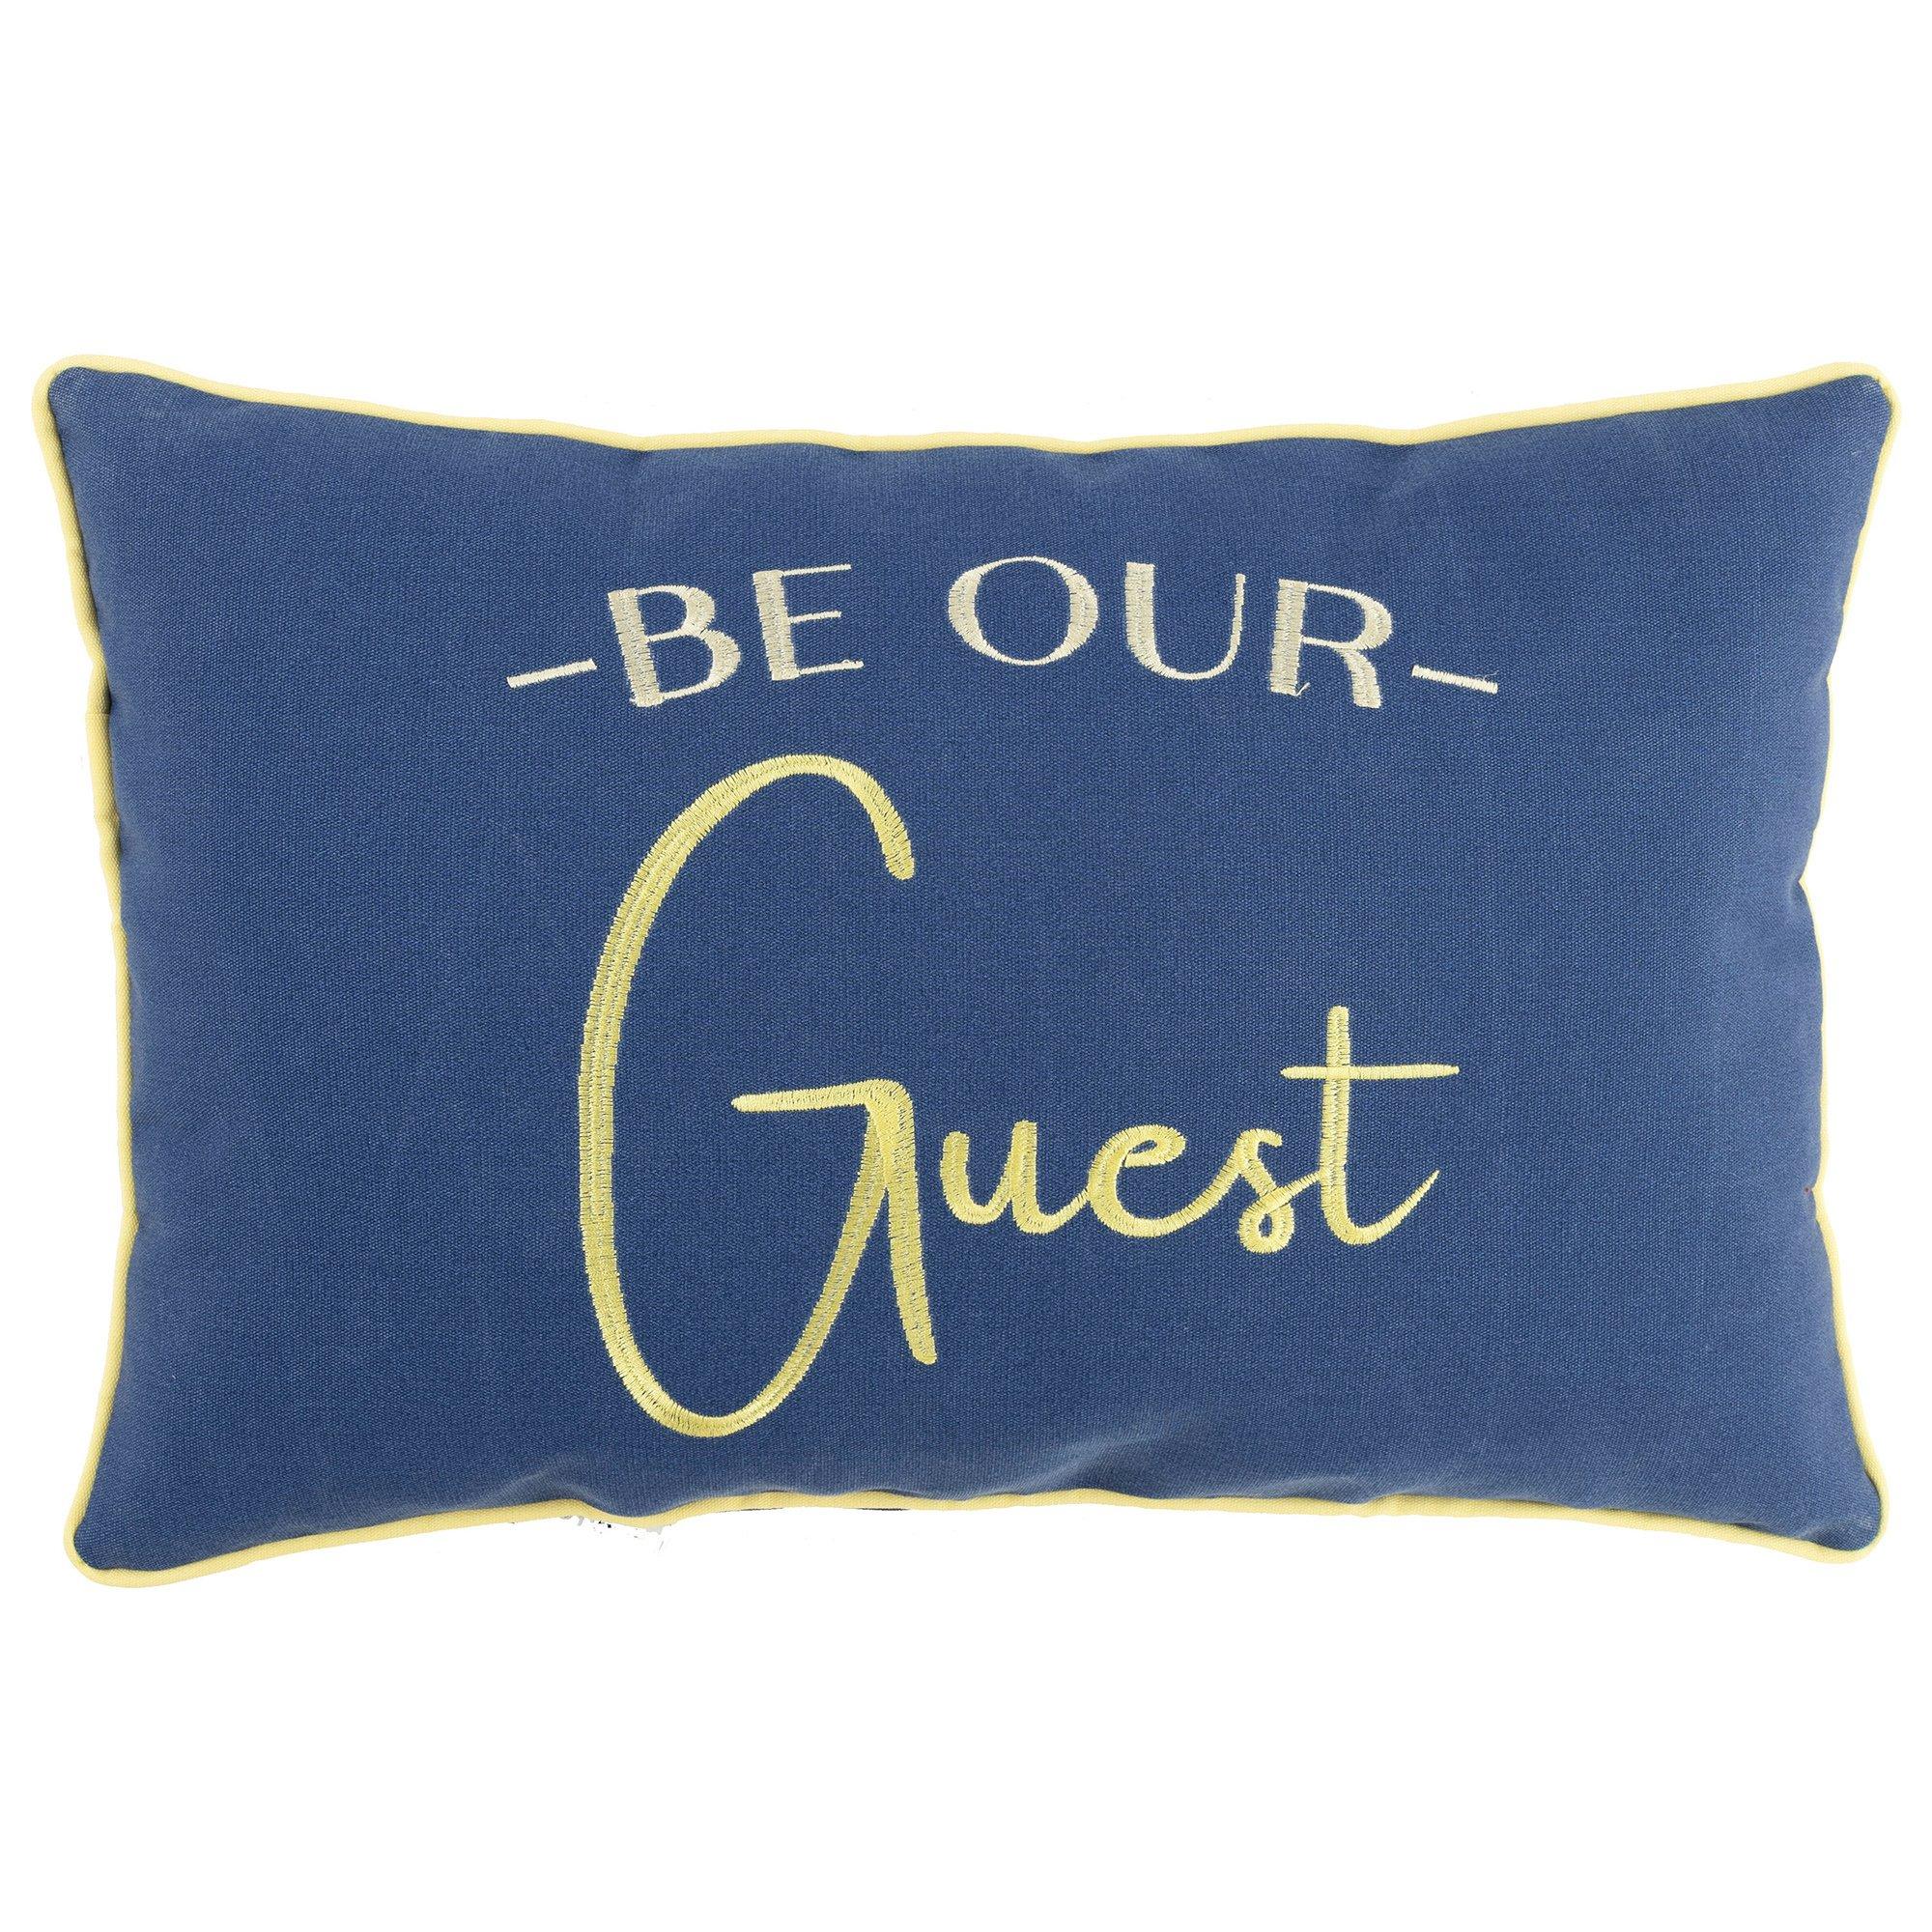 Lush Decor Spec Edtn 13x20 Be Our Guest Outdoor Pillow